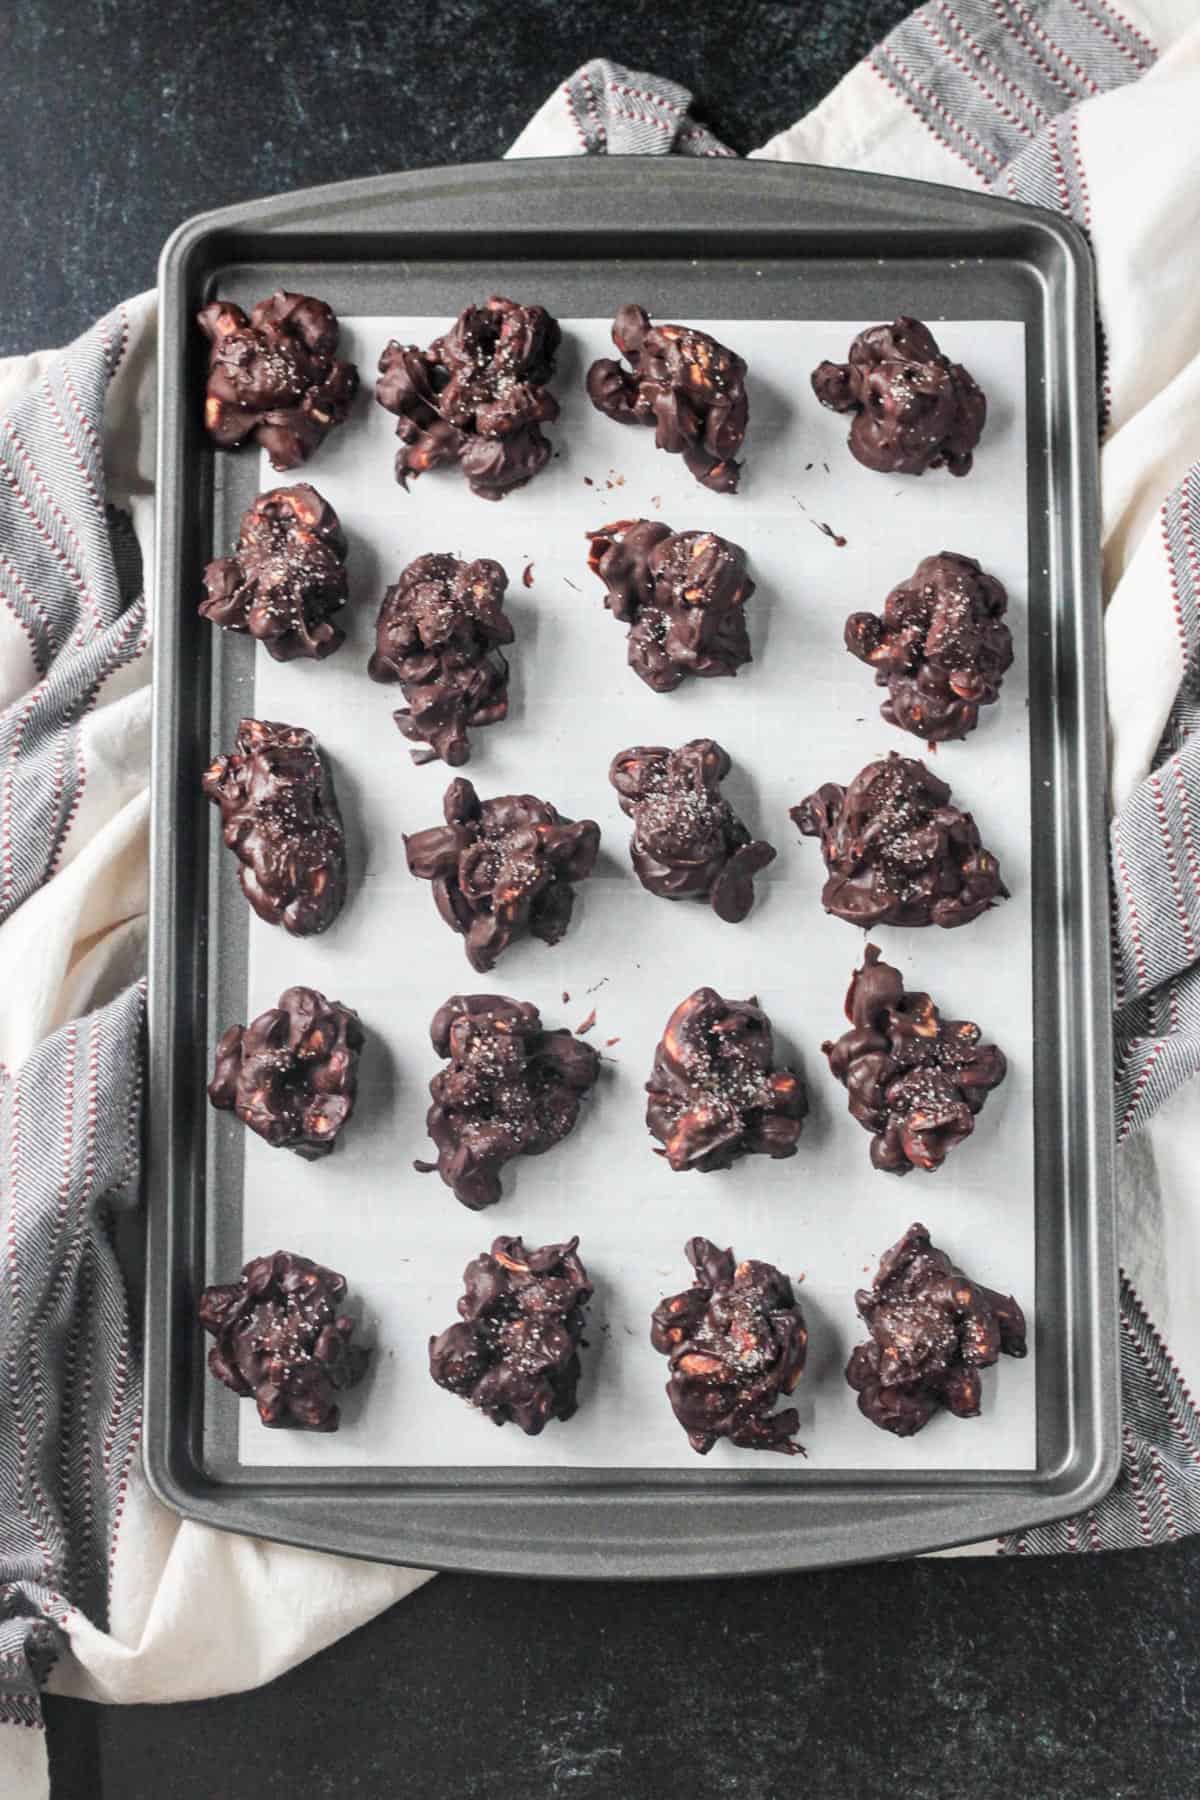 Tray of chocolate covered cashew clusters on parchment paper.